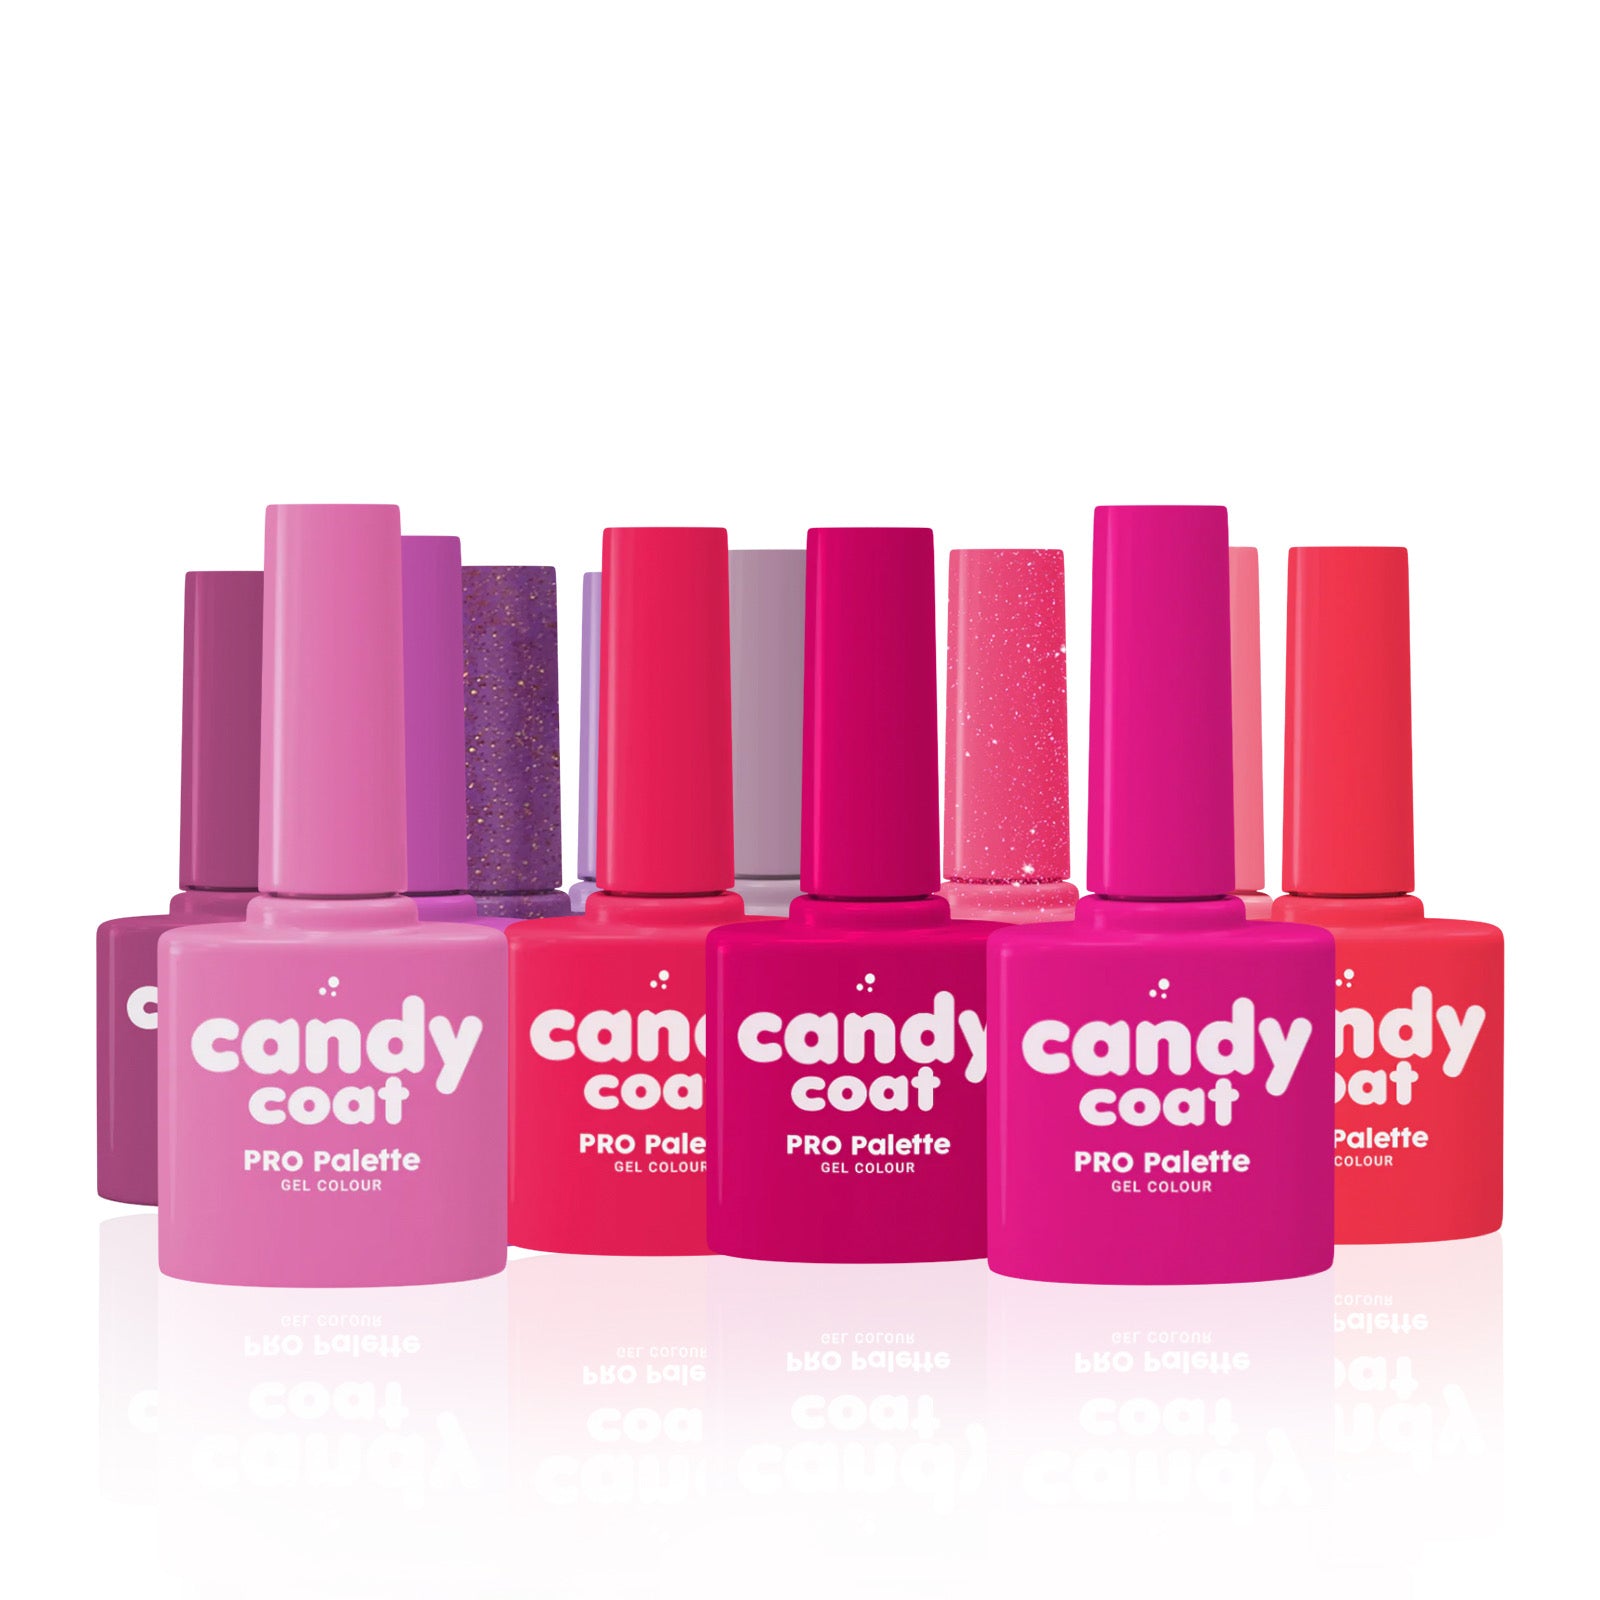 Candy Coat - PRO Palette Pretty Girl Gang - Candy Coat